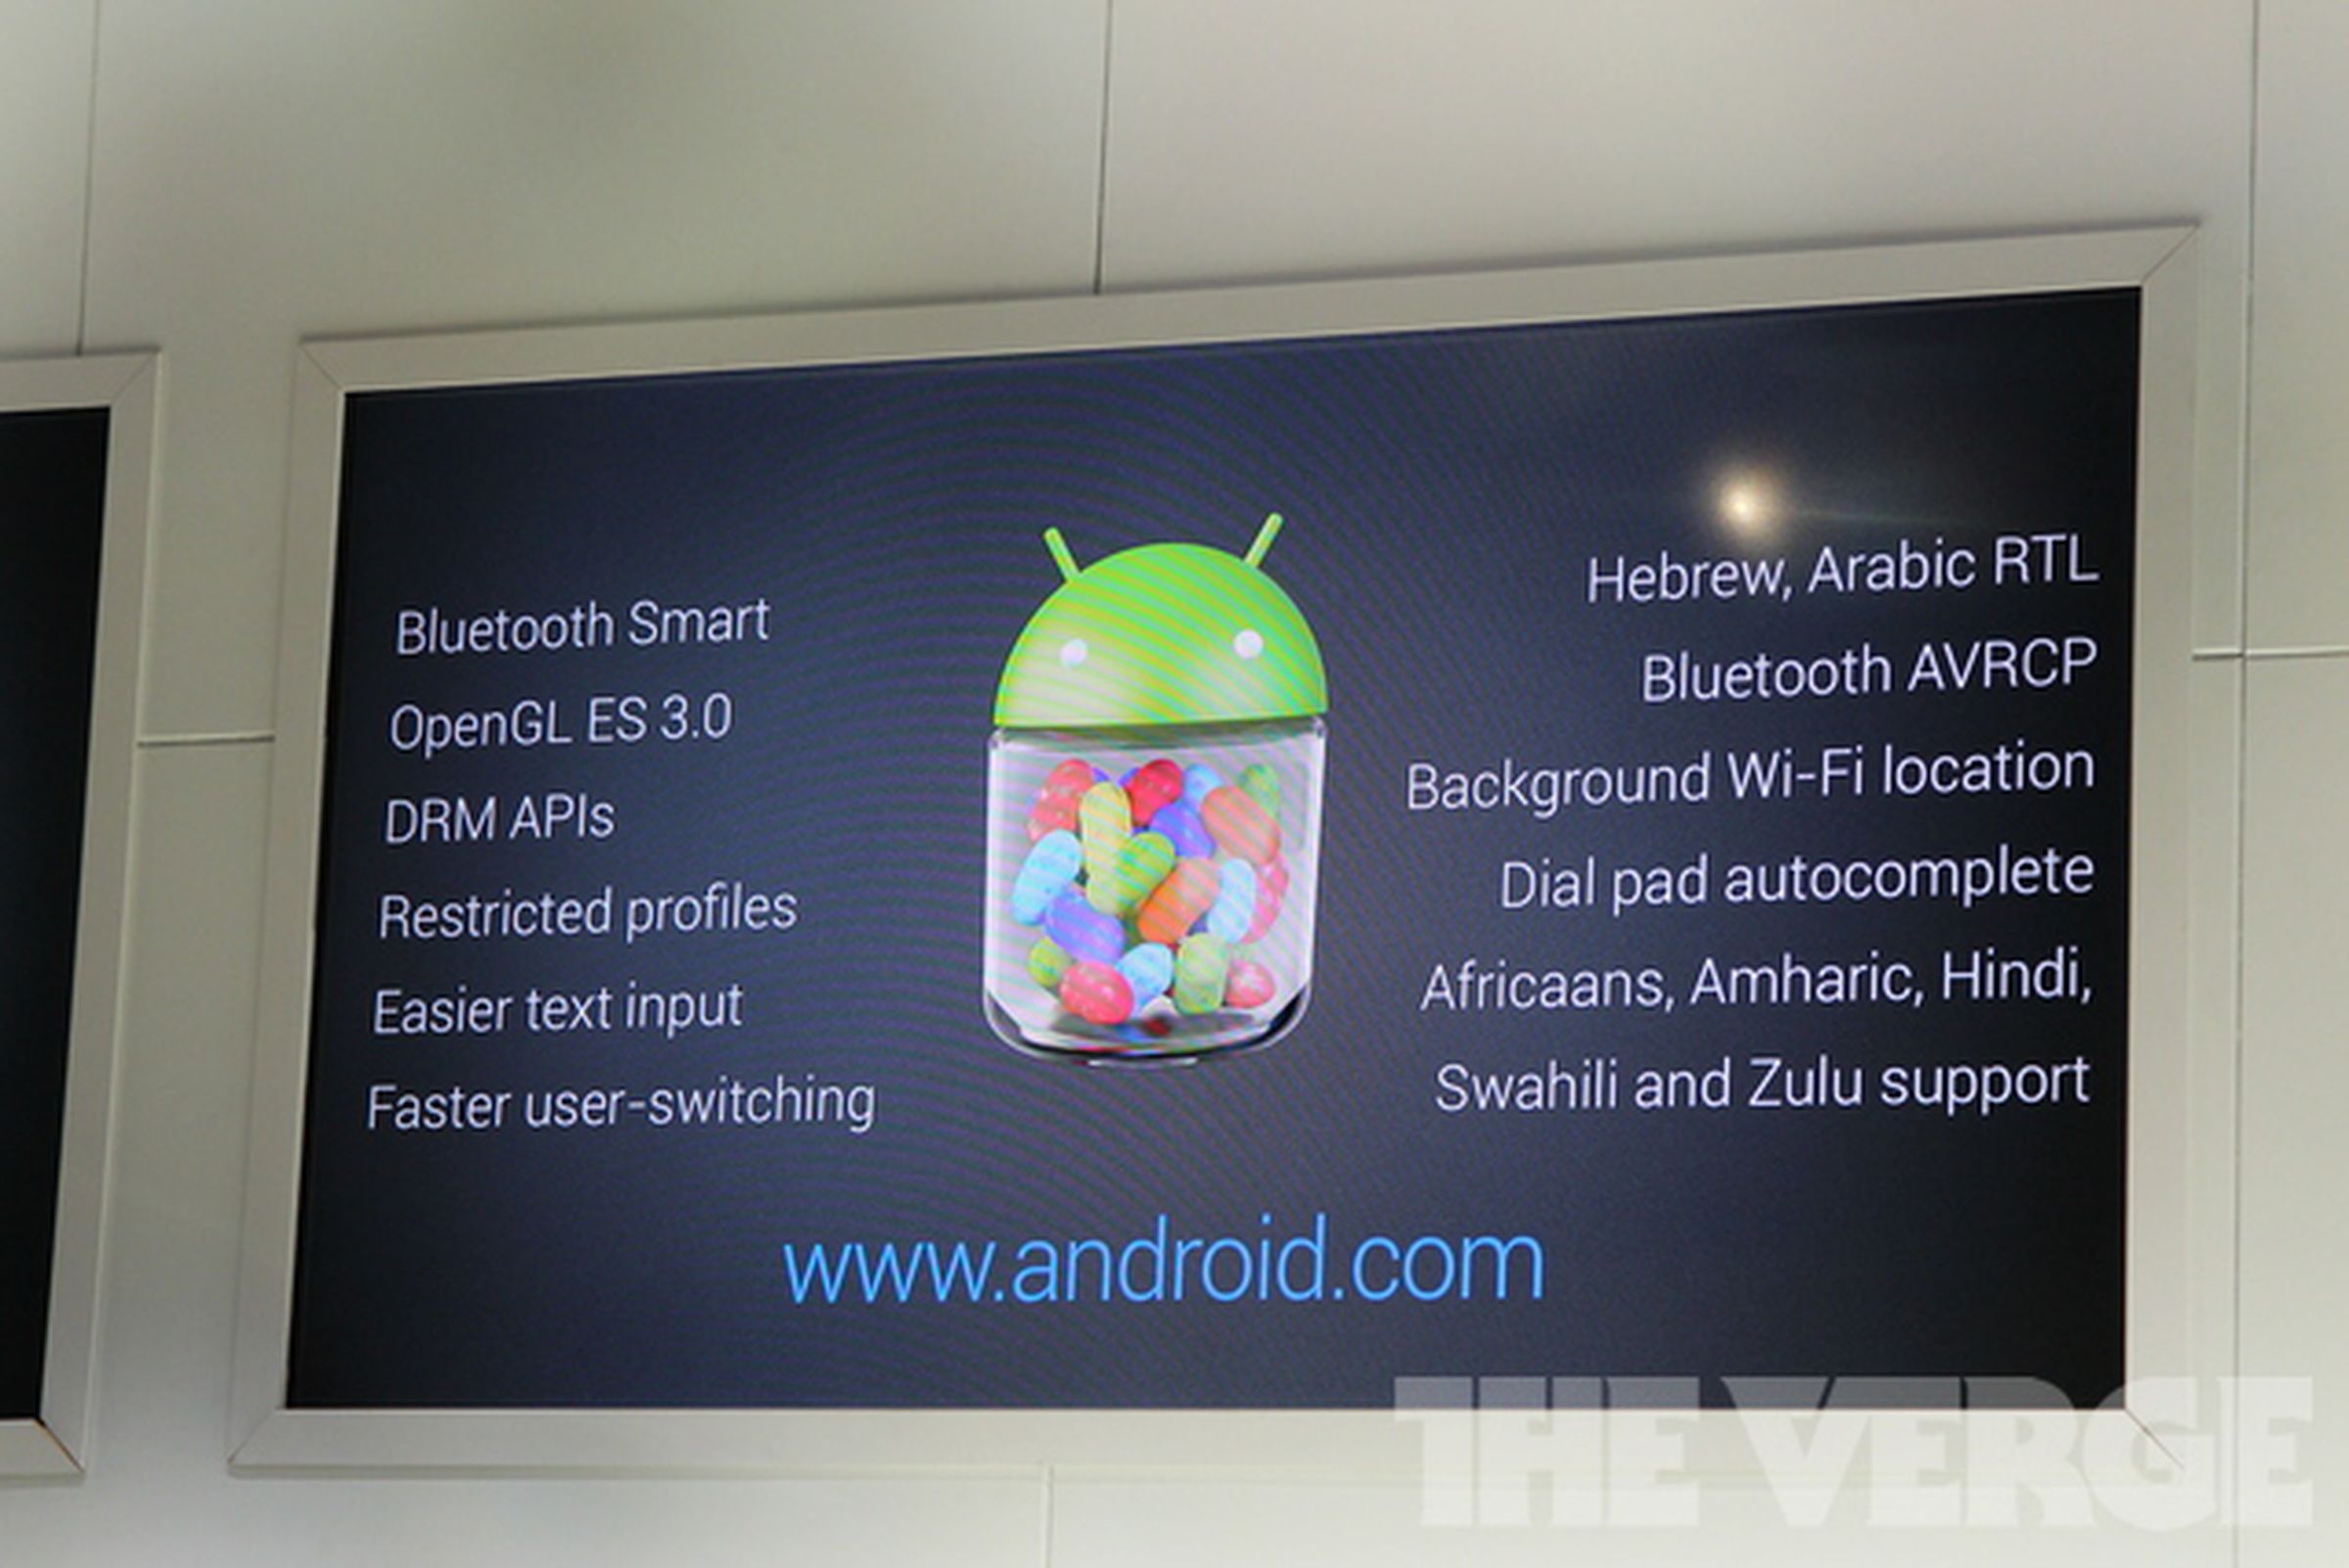 Android 4.3 photos from Google's 'Breakfast with Sundar' event